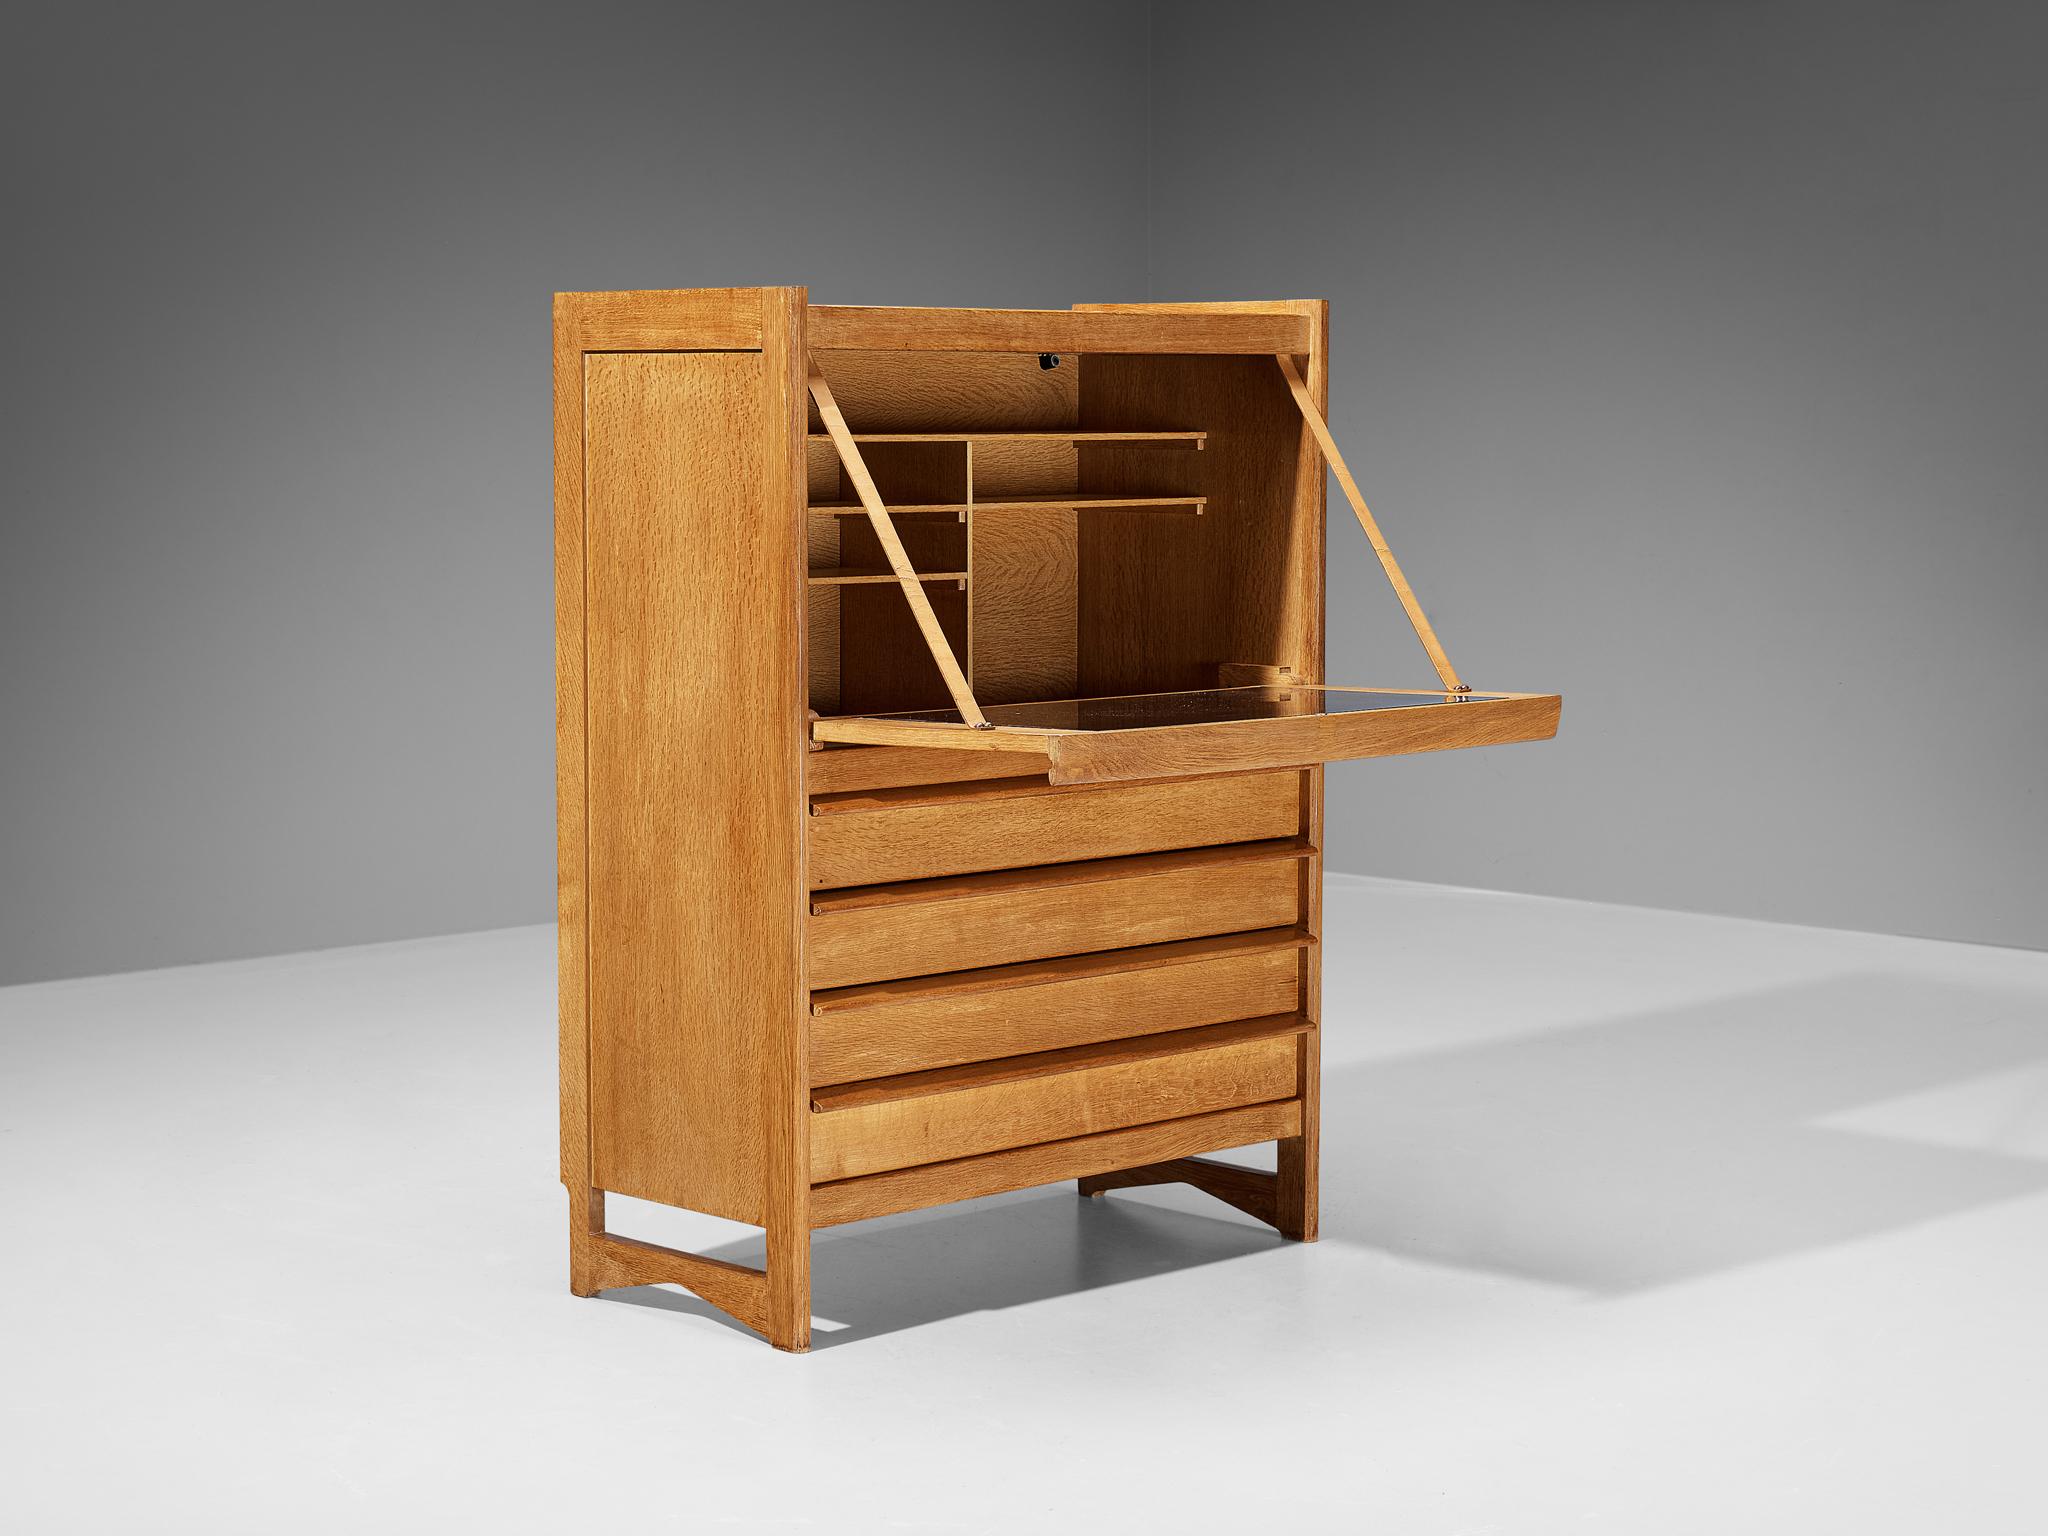 Guillerme et Chambron for Votre Maison, cabinet with secretaire, oak, leather, France, 1960s

This sculptural cabinet is made by the designer duo Guillerme & Chambron. The piece is executed in solid oak and features sculptural lines and edges. The